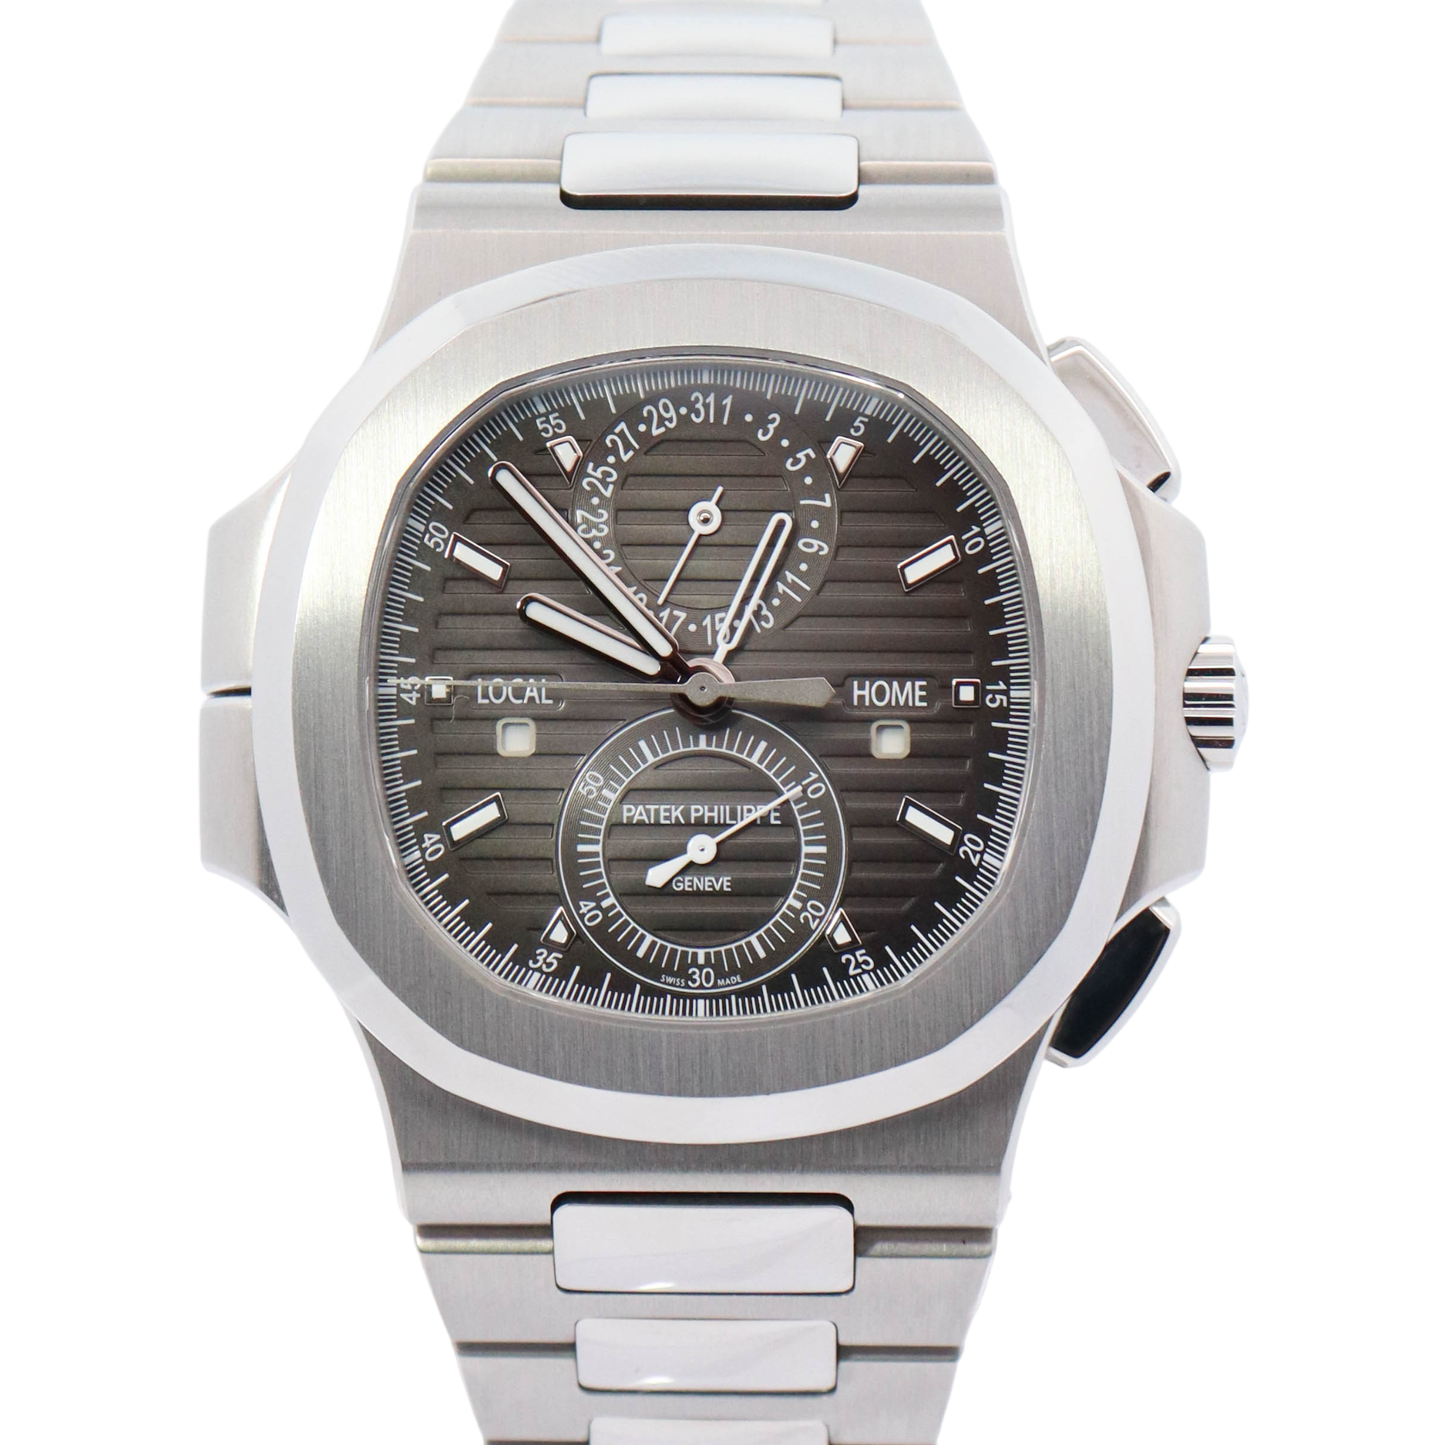 Patek Philippe Nautilus Travel Time 40.5mm Stainless Steel Black Gradated Chronograph Dial Watch Reference# 5990/A1-001 - Happy Jewelers Fine Jewelry Lifetime Warranty